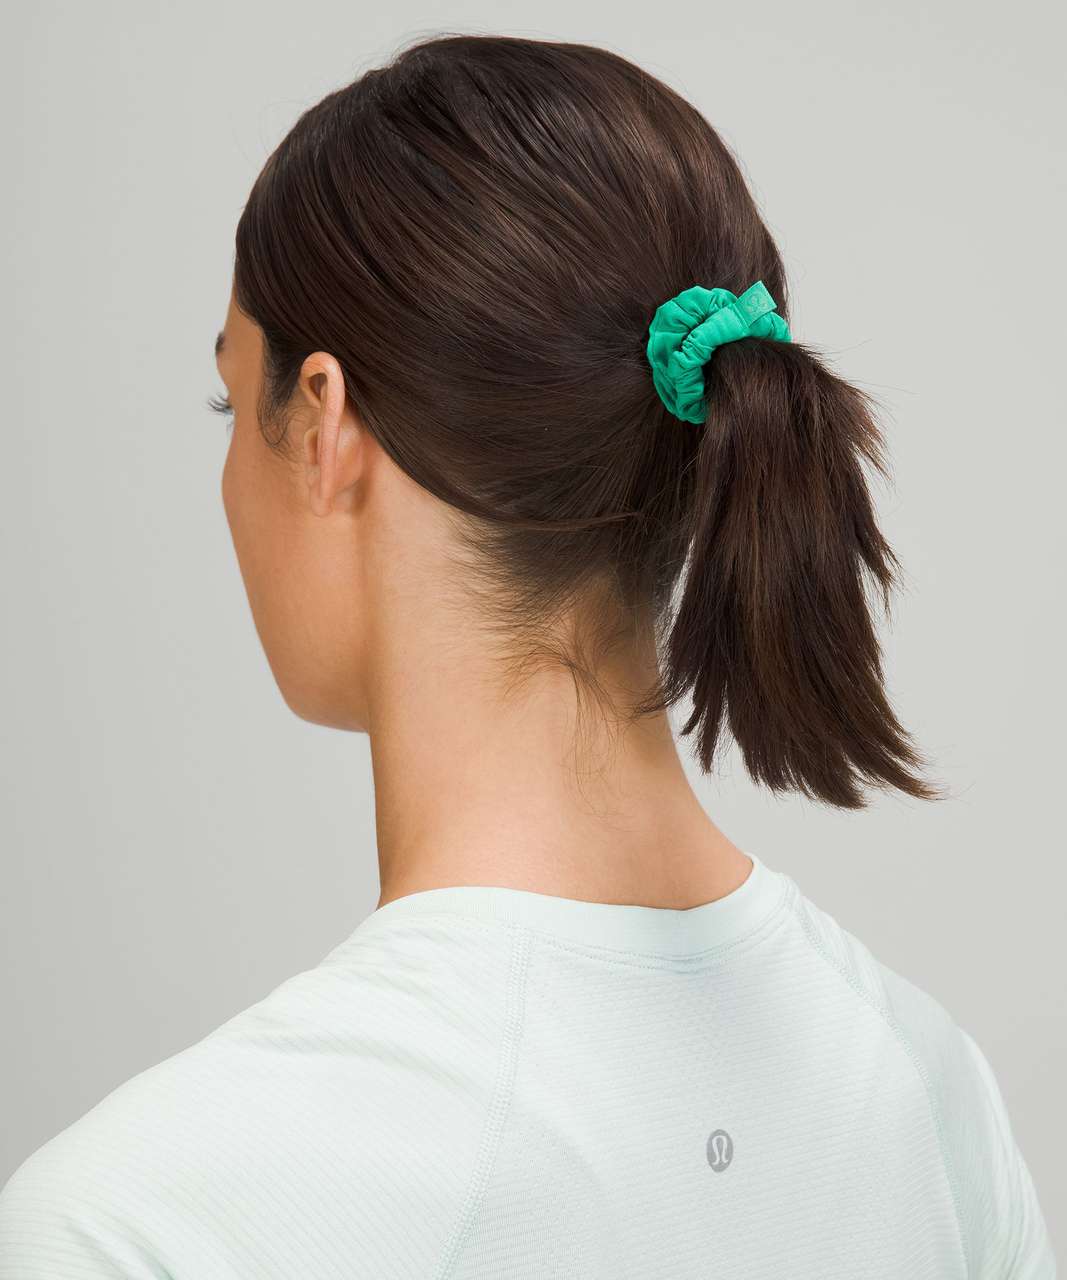 Lululemon Skinny Scrunchie 6 Pack - Blue Nile / Larkspur / Bleached Apricot / Emerald Ice / Delicate Mint / Rover